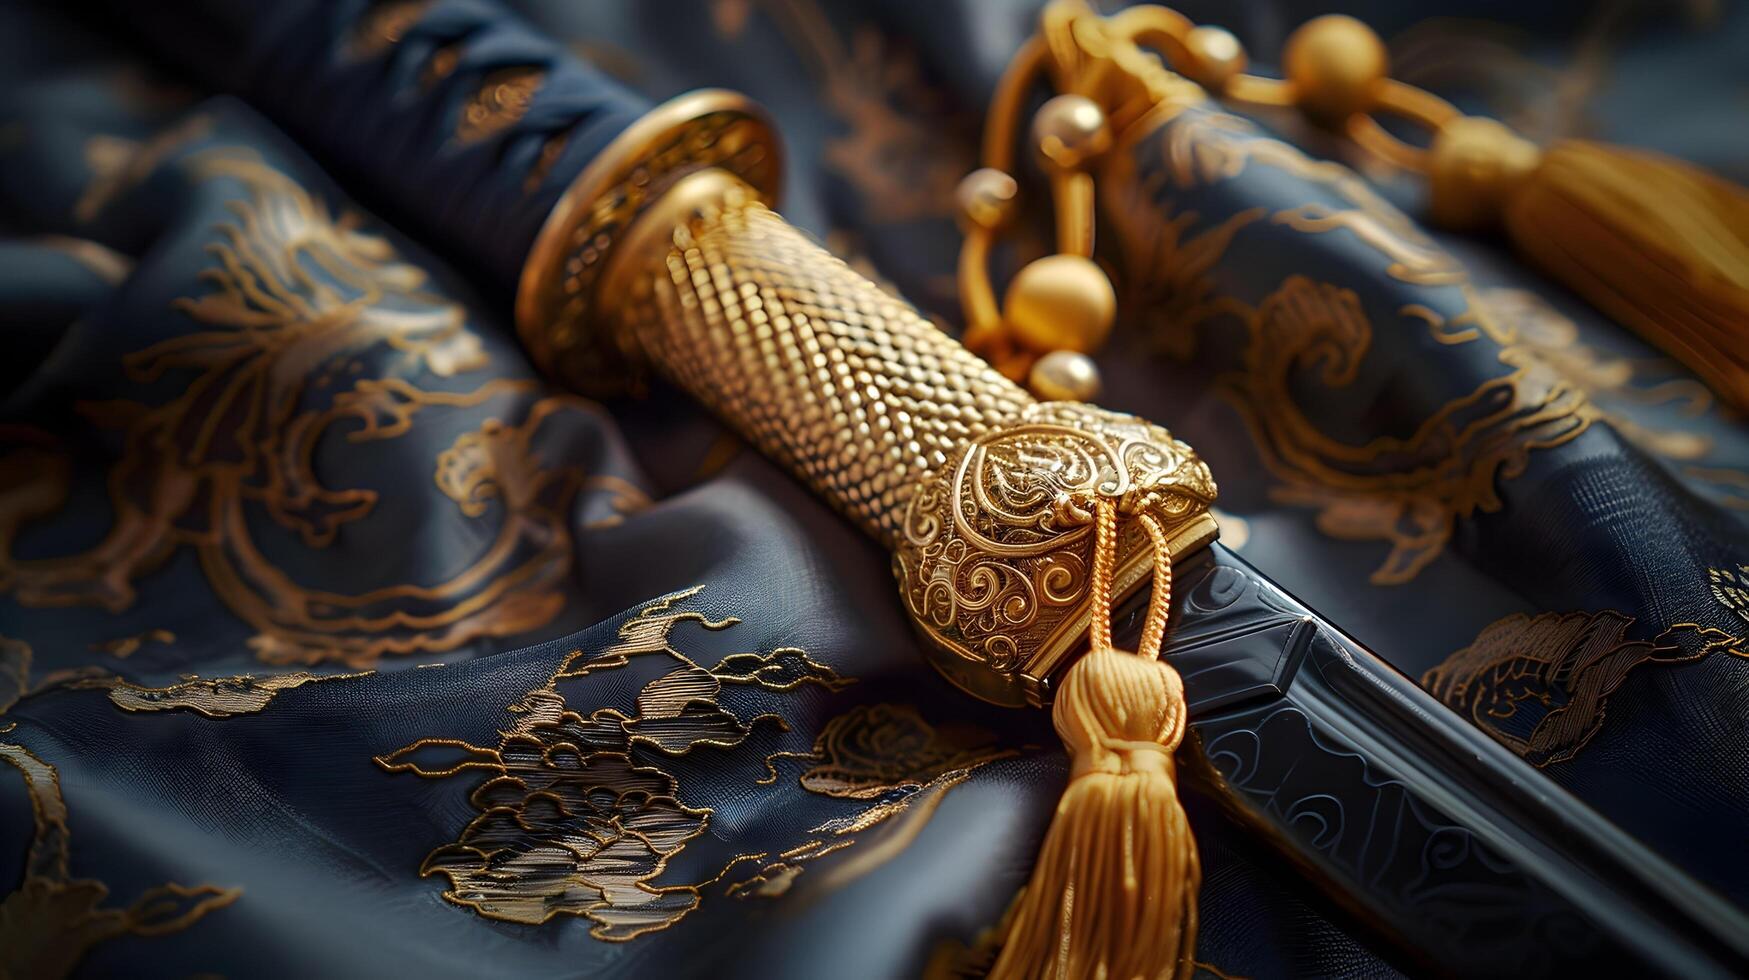 Ornate Ceremonial Sword with Golden Tassel Symbolizing Honor and Tradition photo